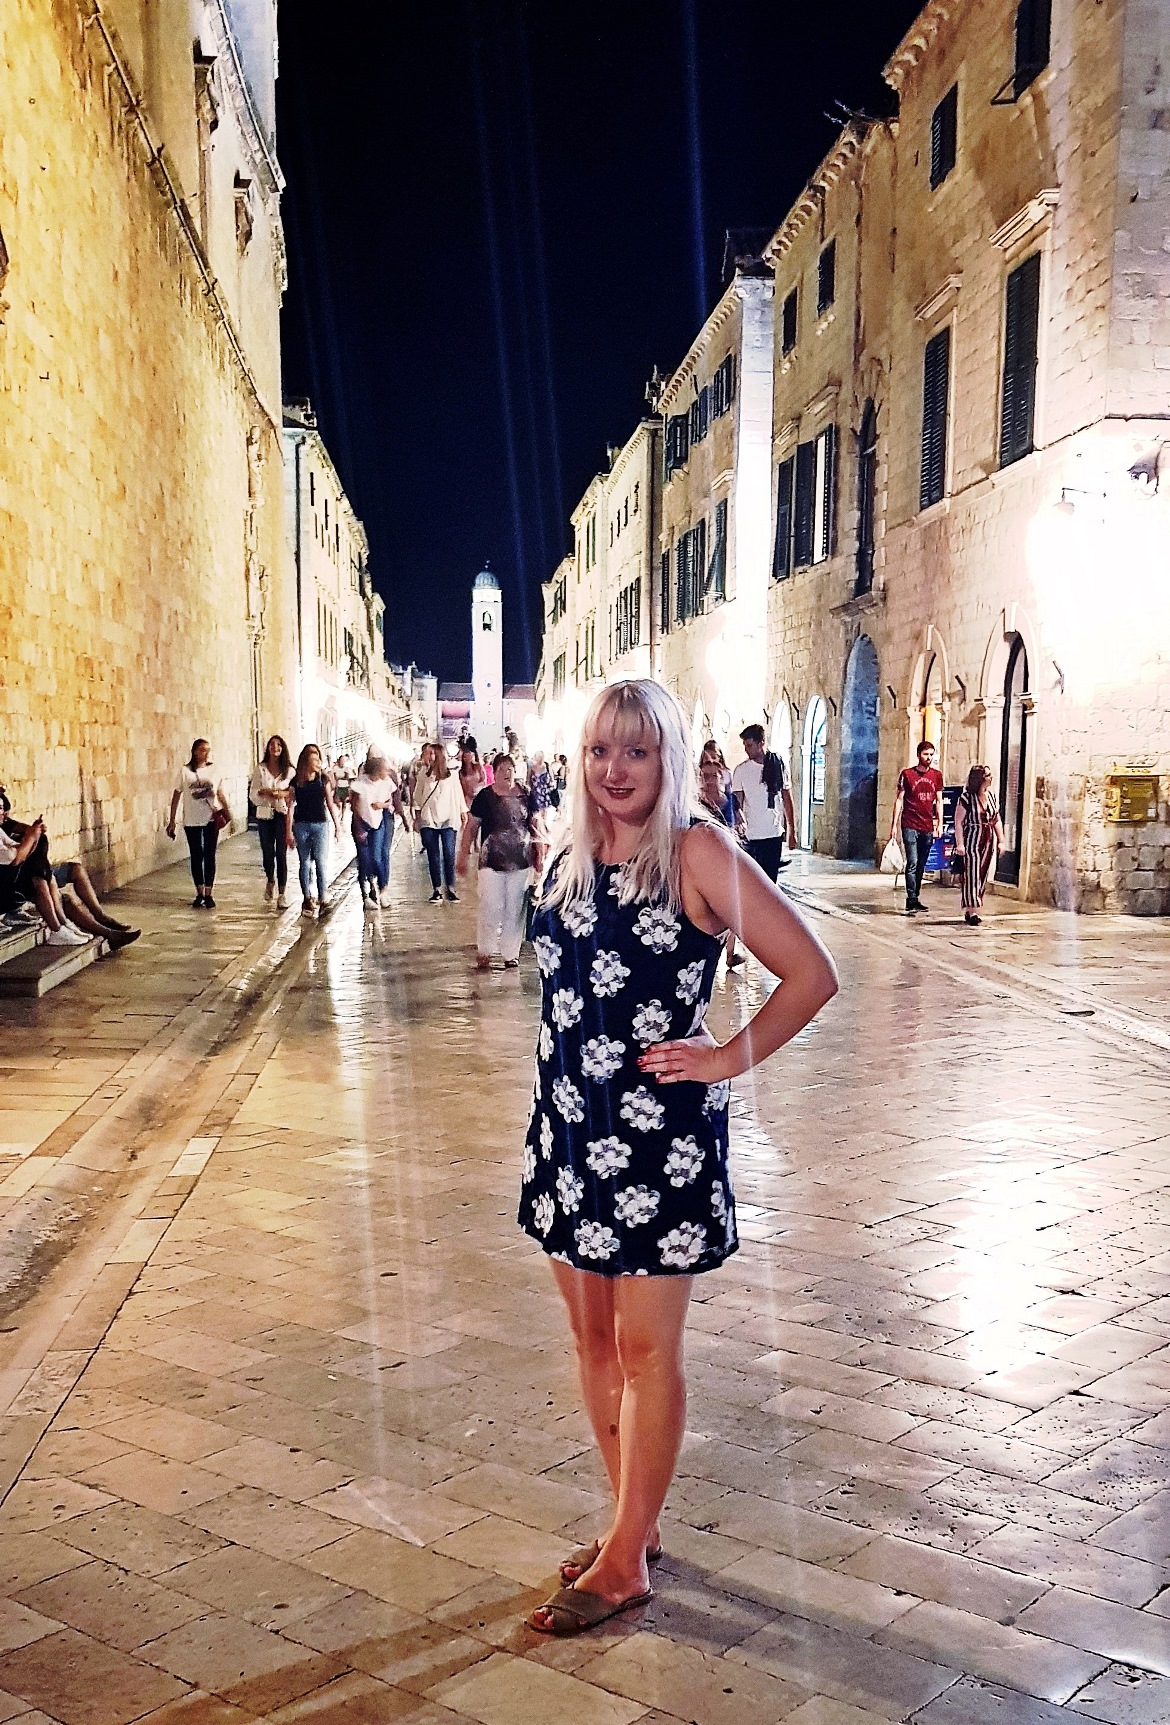 Dubrovnik, city of stone and light - Croatia in Photographs by BeckyBecky Blogs